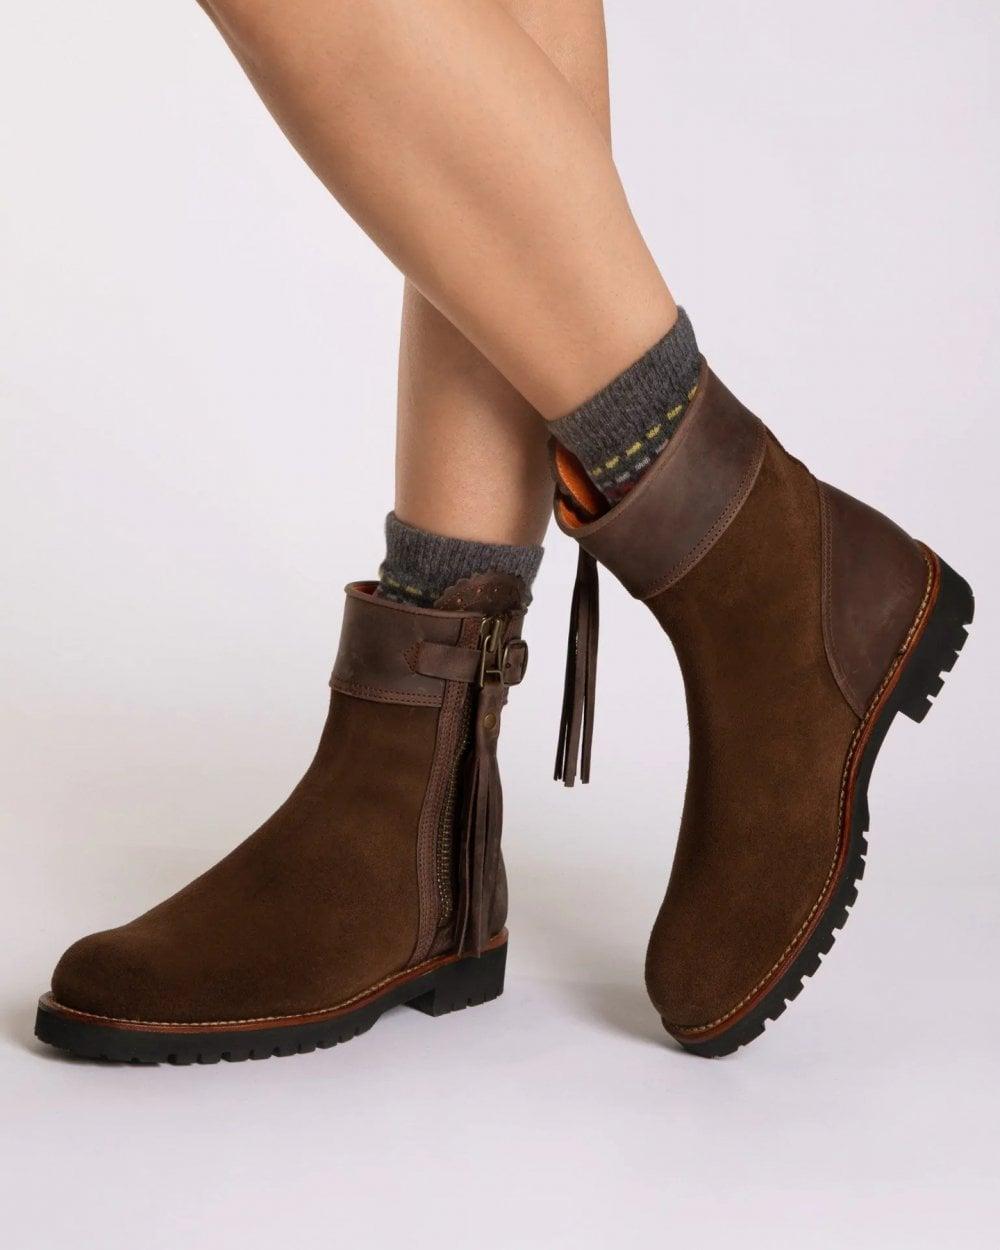 Penelope Chilvers Inclement Cropped Tassel Boot in Brown | Lyst